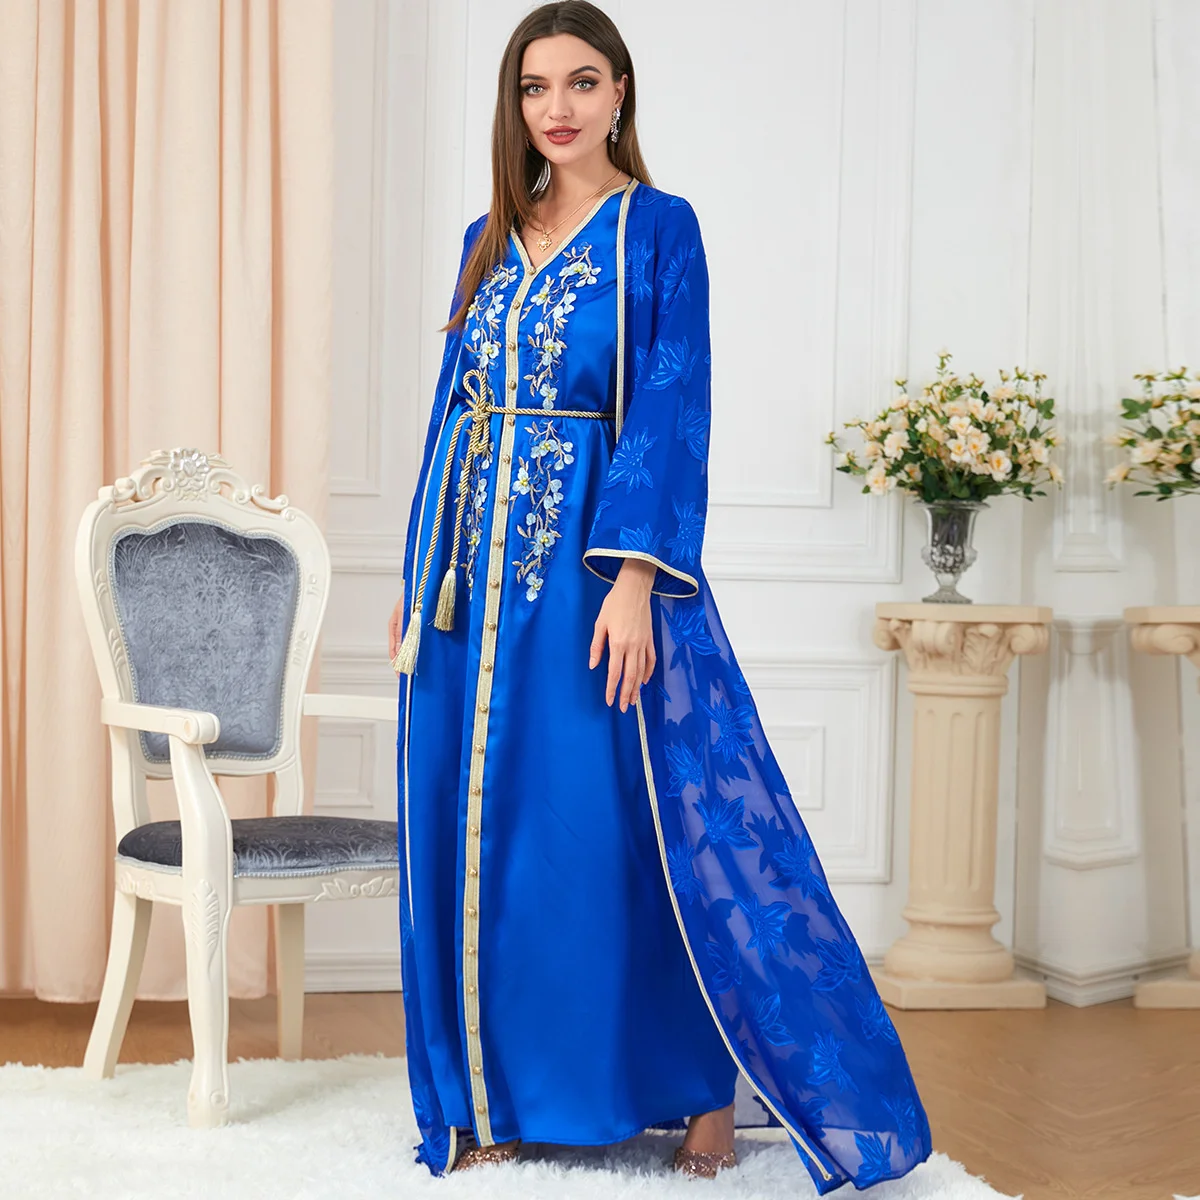 Embroidered Spring Summer Blue 2 Piece Long Loose Women Dresses 2023 Long Sleeve V-neck Casual Loose Fashion Dress Vestidos